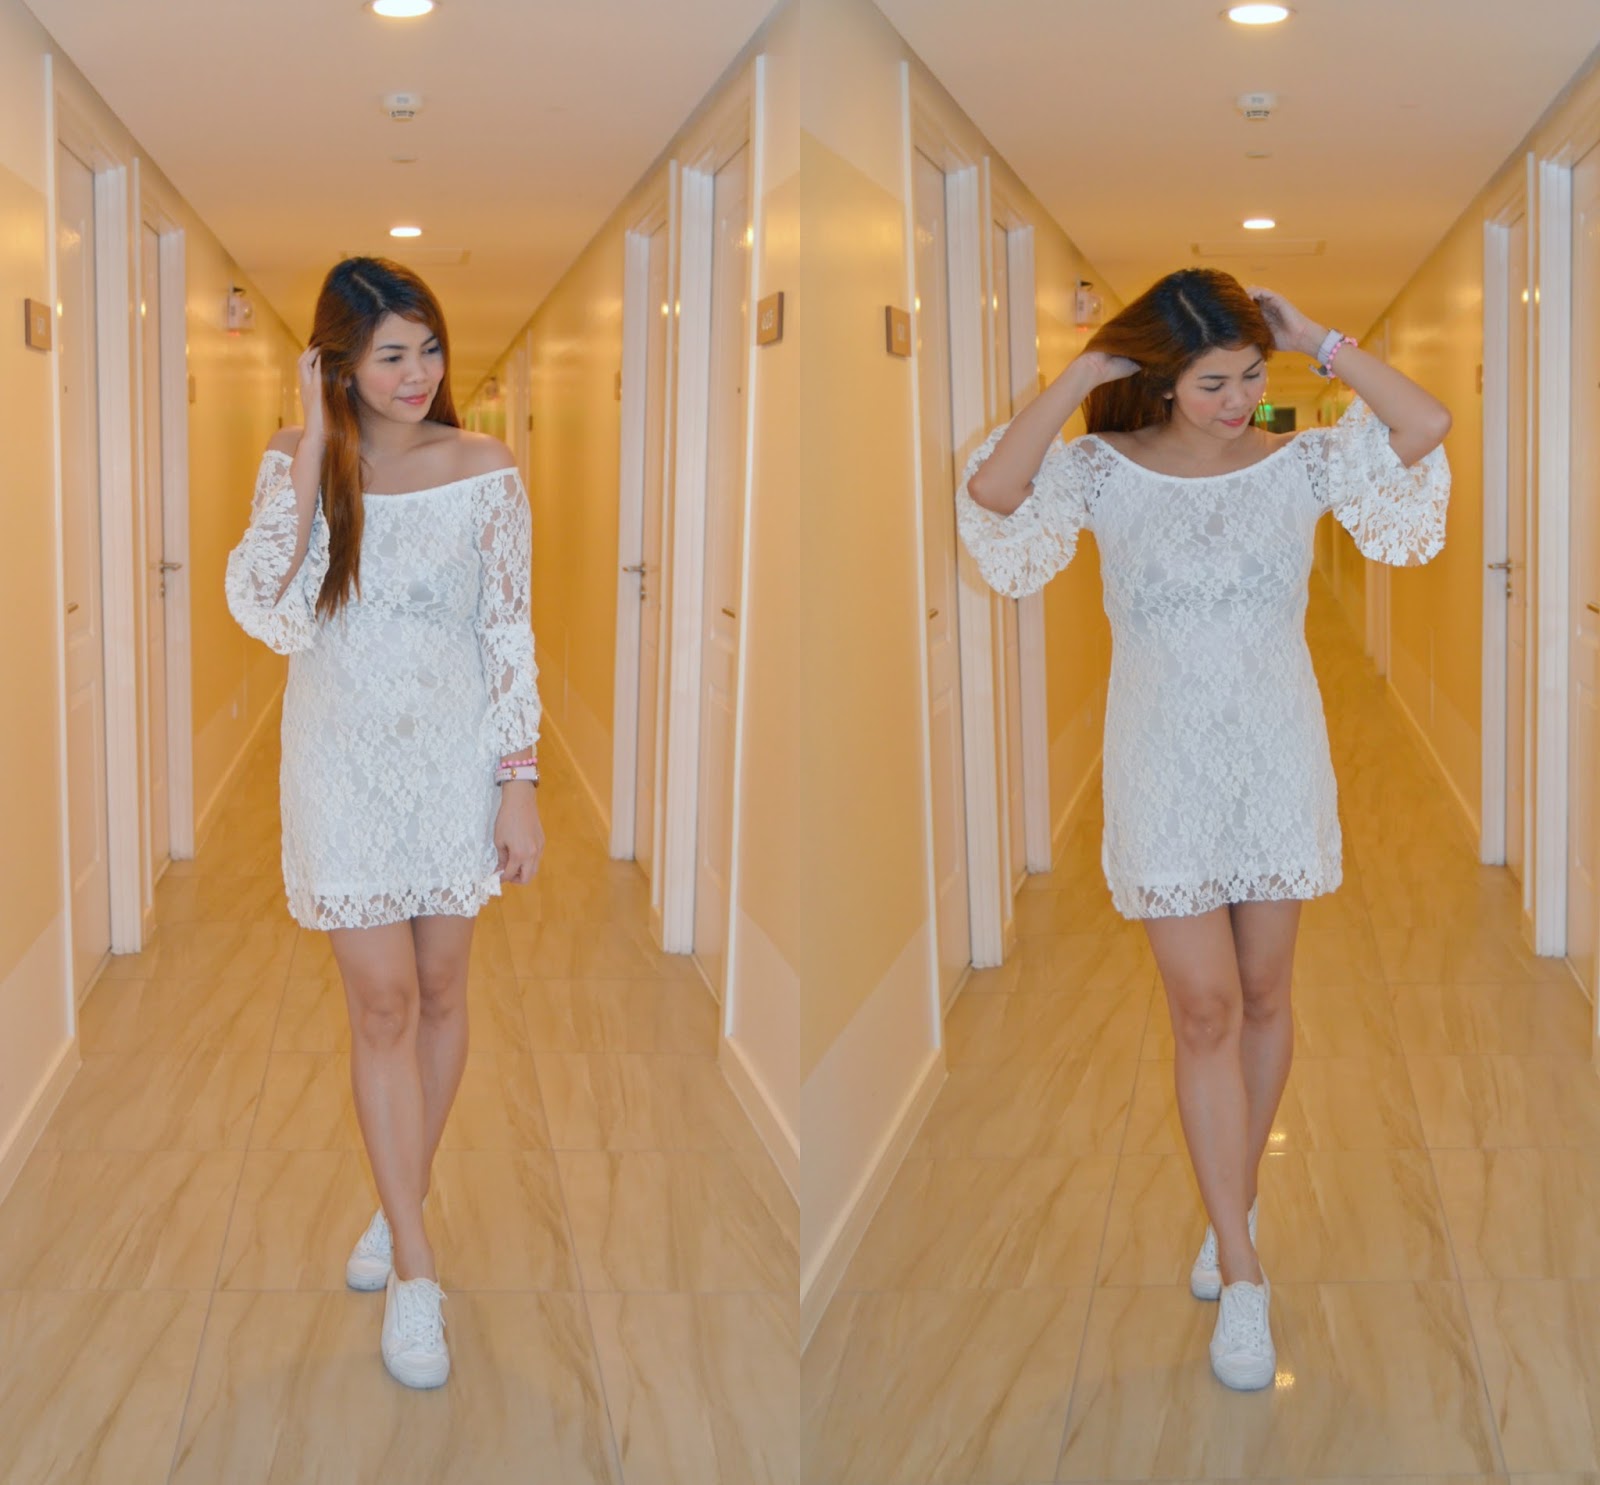 The Bandwagon Chic: White Off Shoulder Lace Dress for $2?